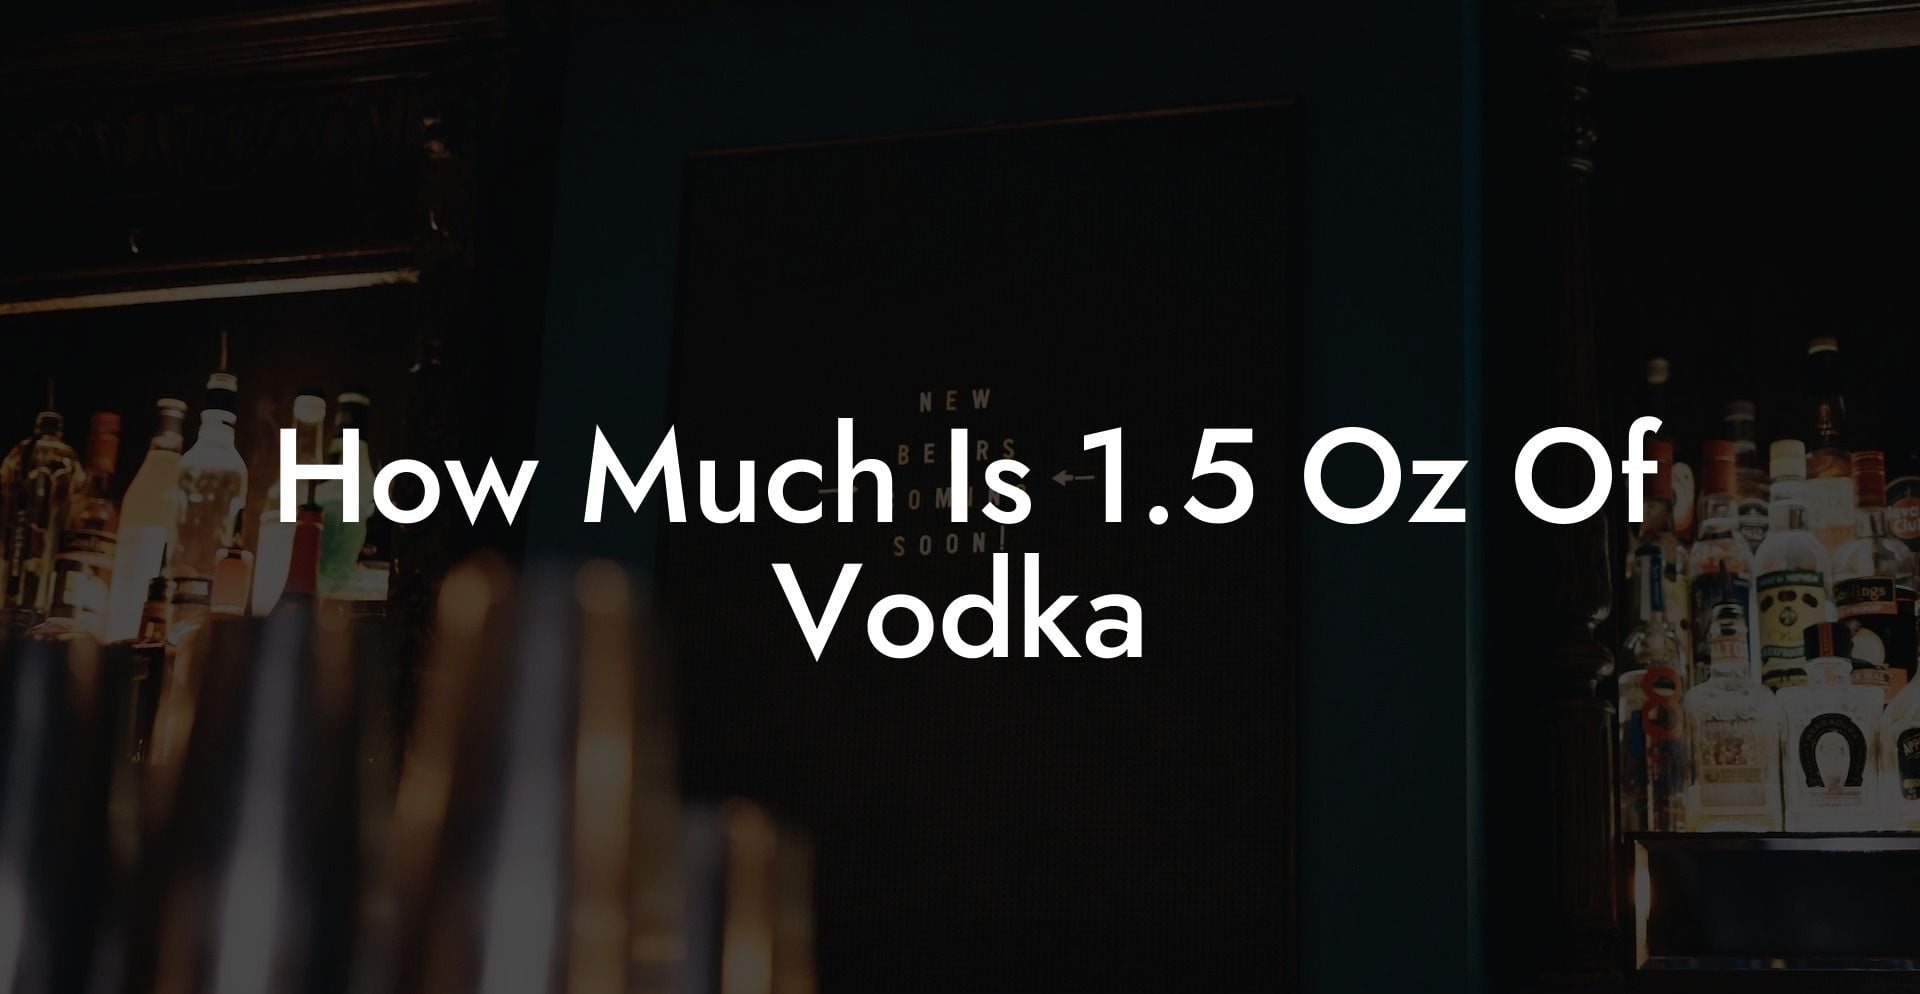 How Much Is 1.5 Oz Of Vodka